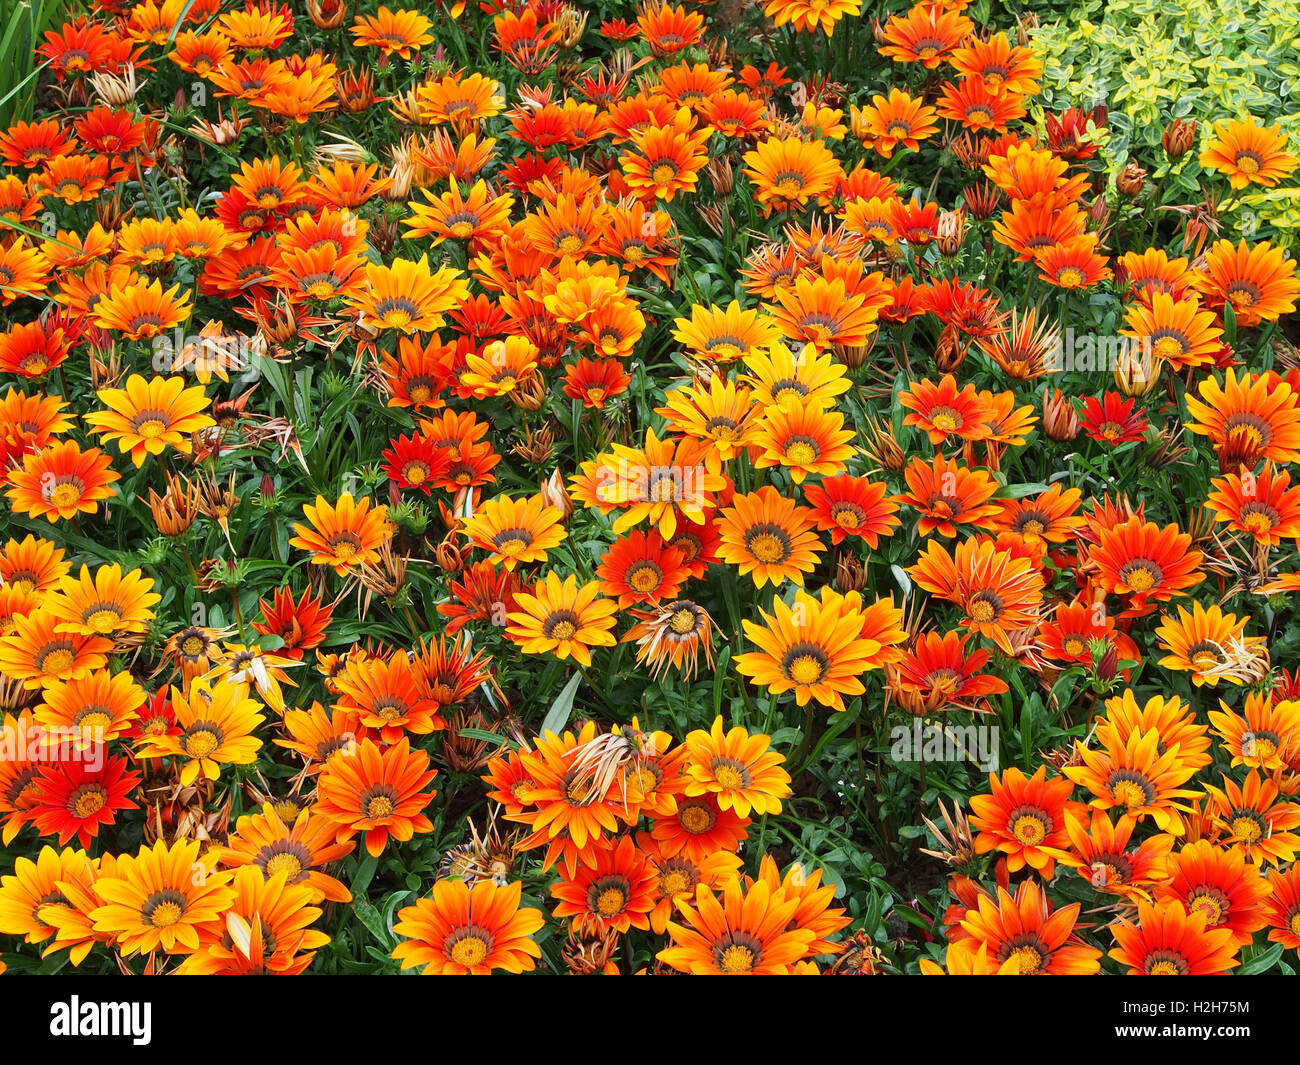 Orange gazanias (a drought tolerant plant native to South Africa) in full bloom. Stock Photo